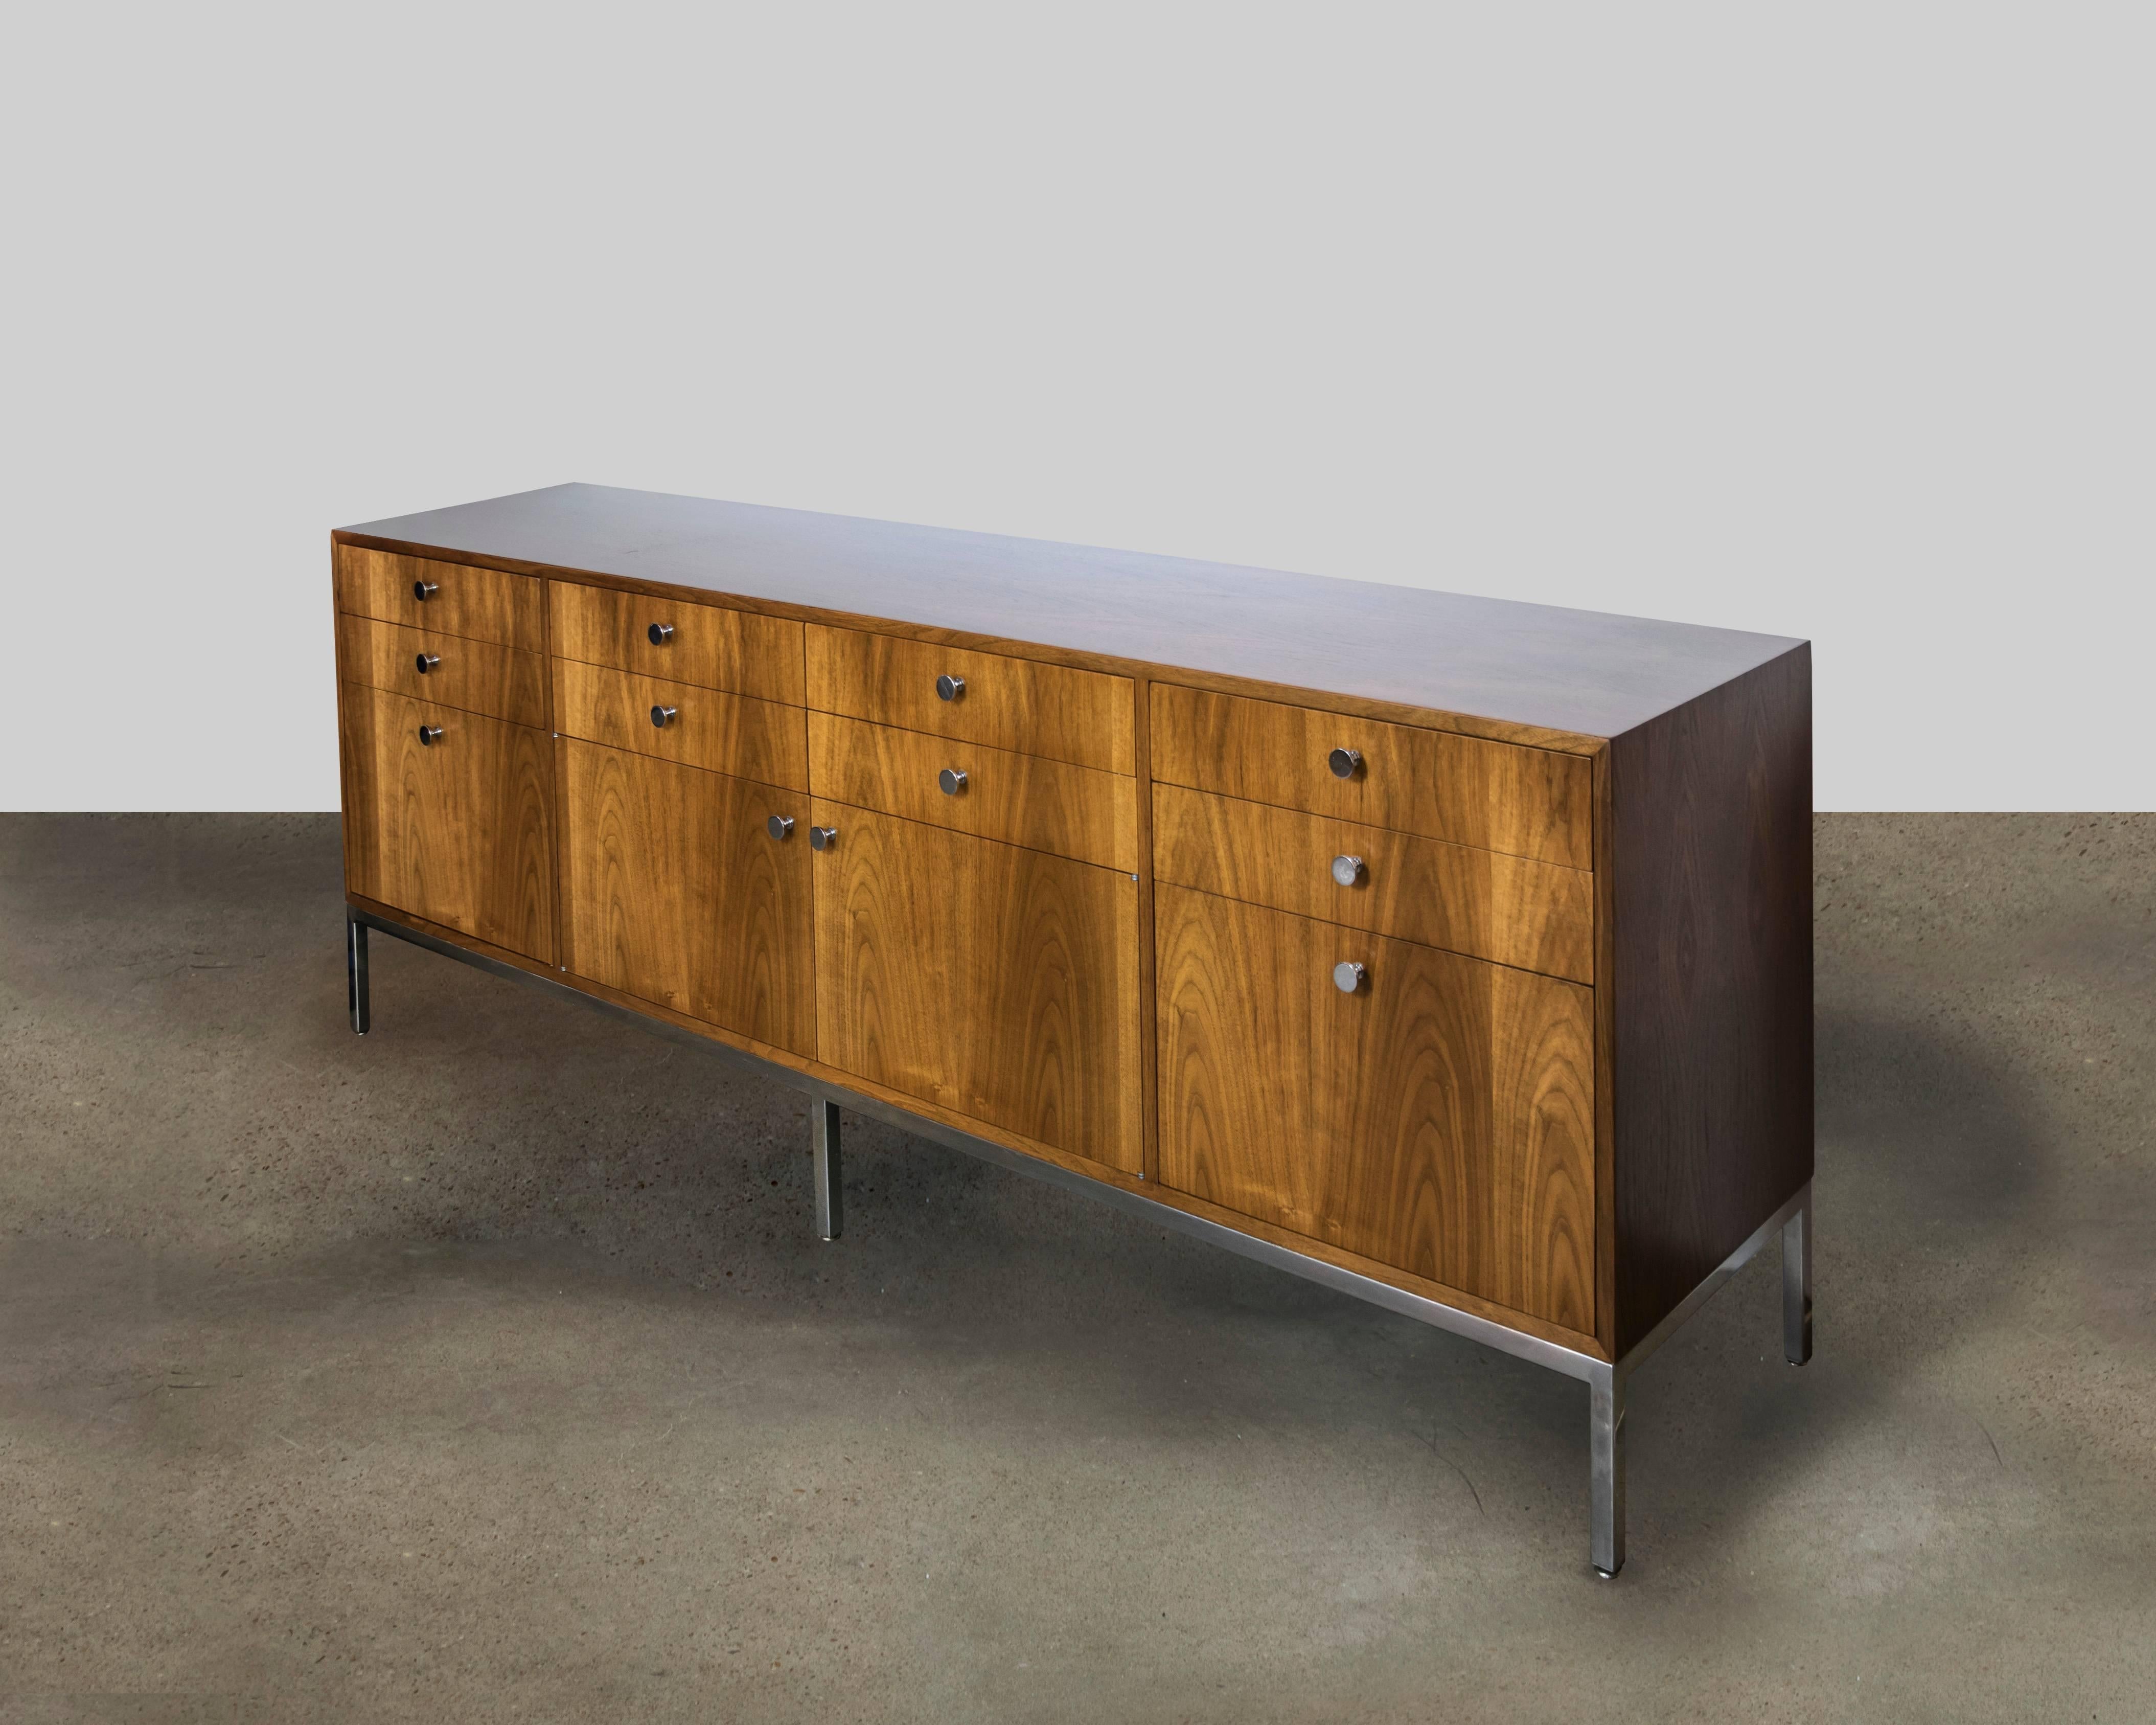 This is such a beautiful credenza by Pace Furniture Company and was manufactured in the 1960s. It is extremely well-made with a chrome base and matching hardware. The finish is a warm honey color. It has eight small drawers, two large drawers and a